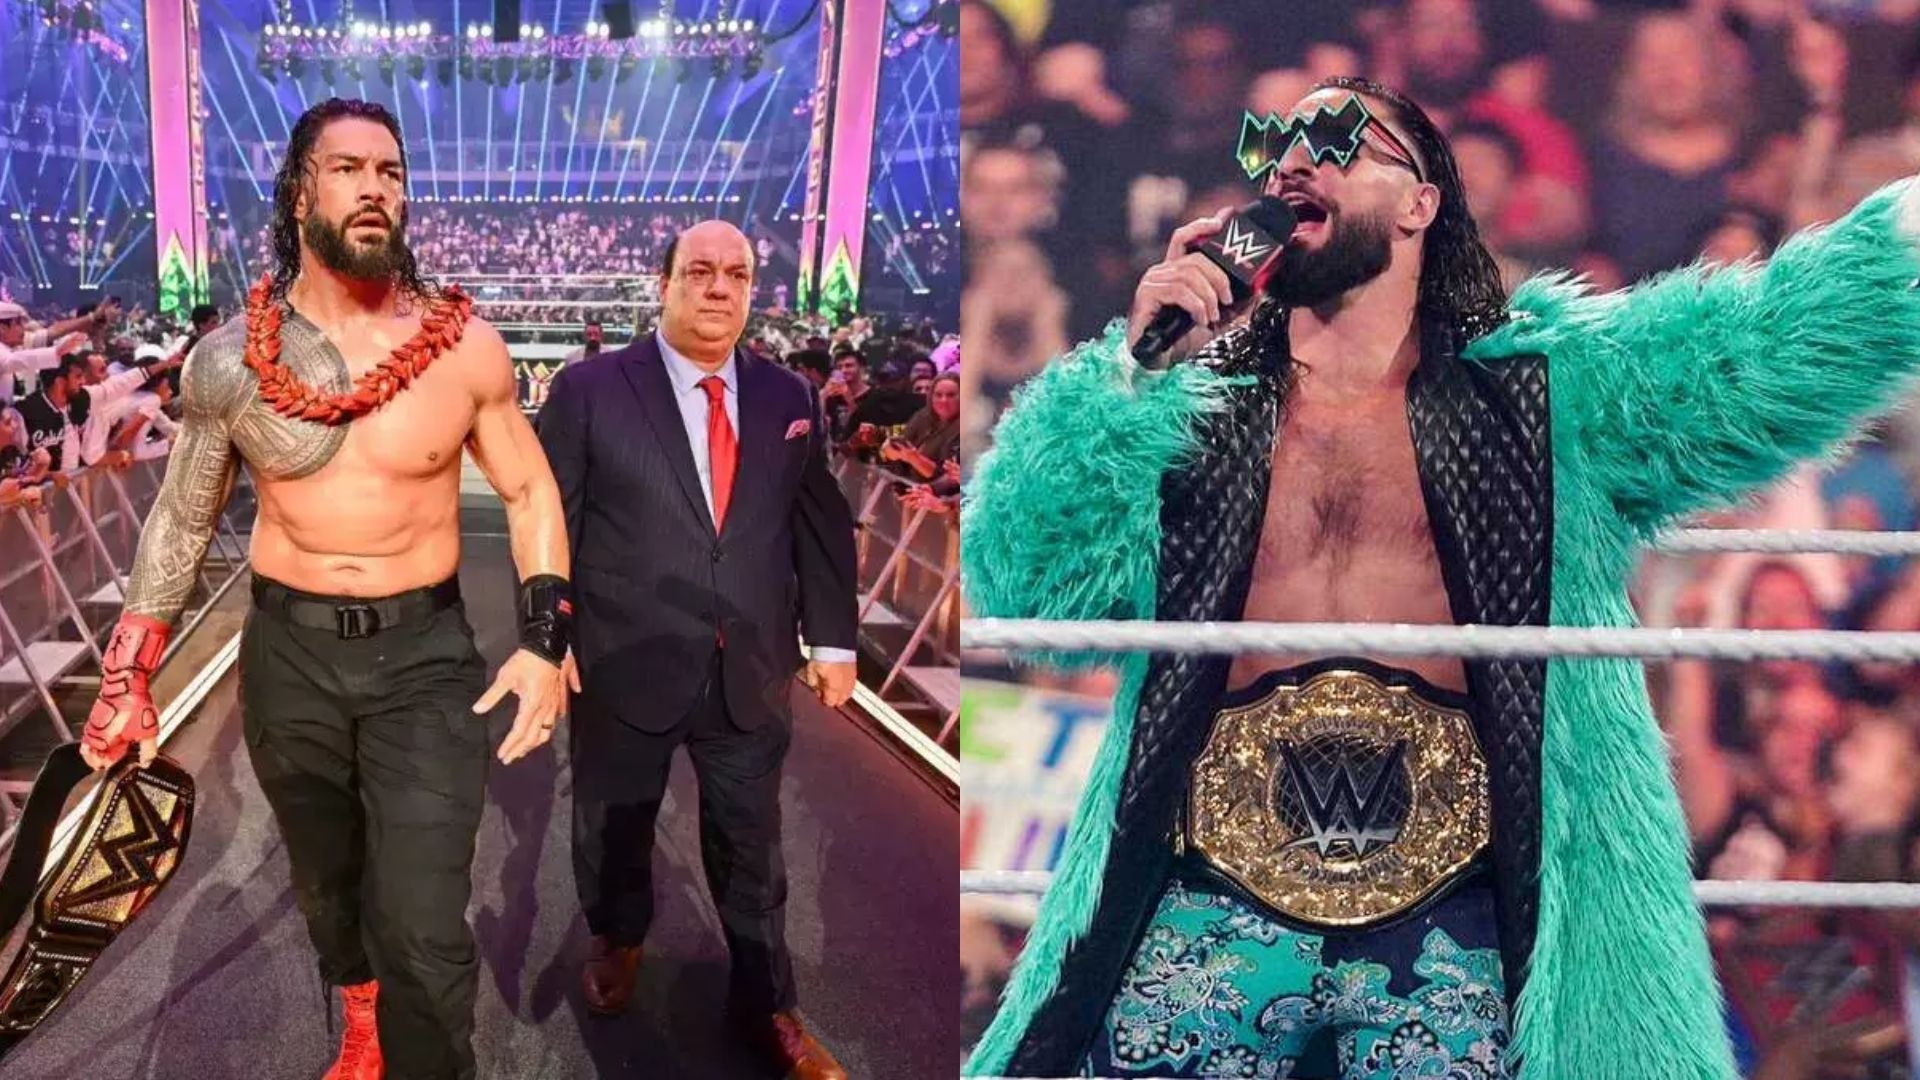 many title changes may happen wrestlemania xl